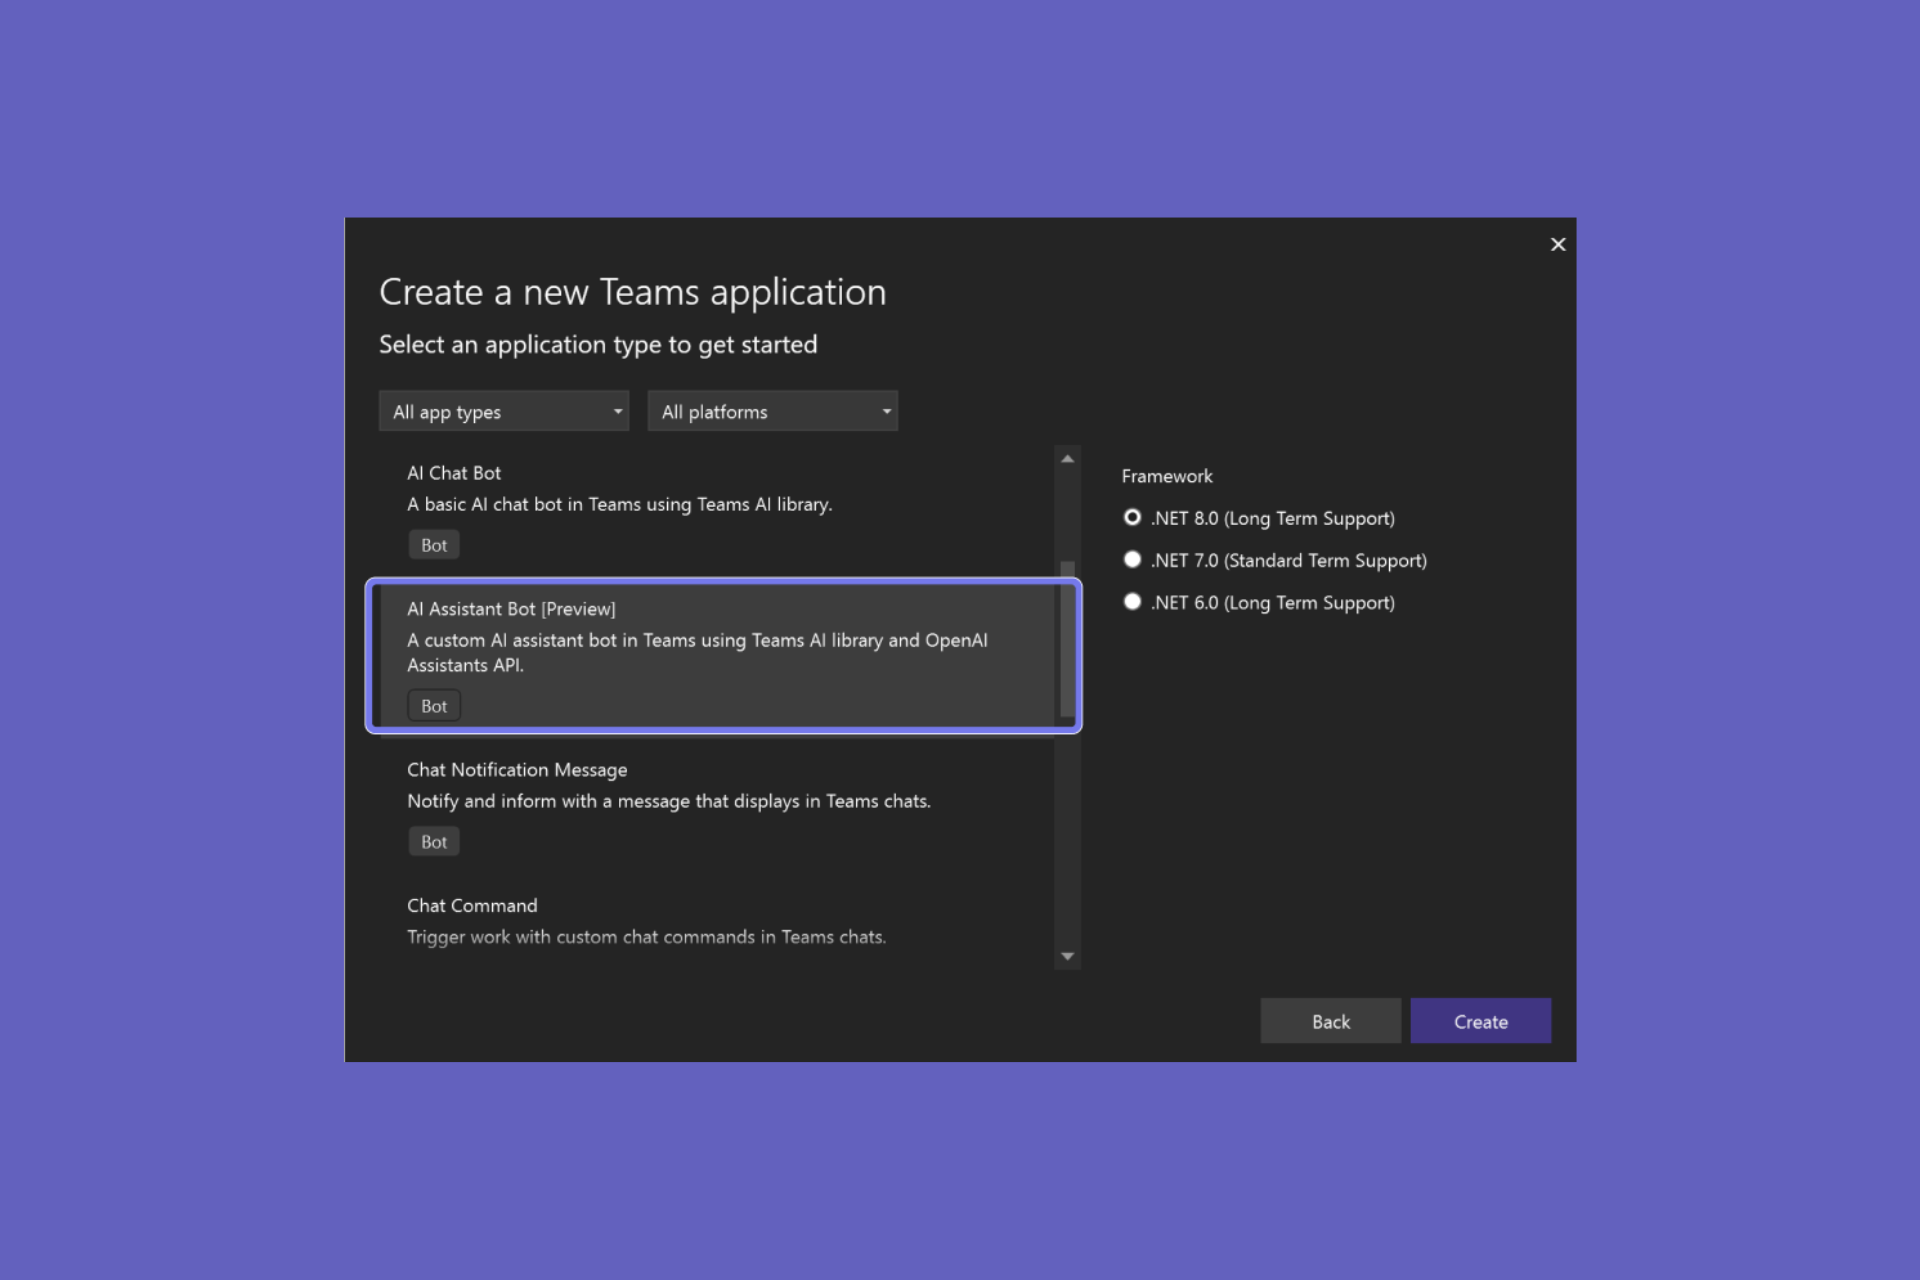 Teams Toolkit 17.9 version for Visual Studio comes with new exciting features